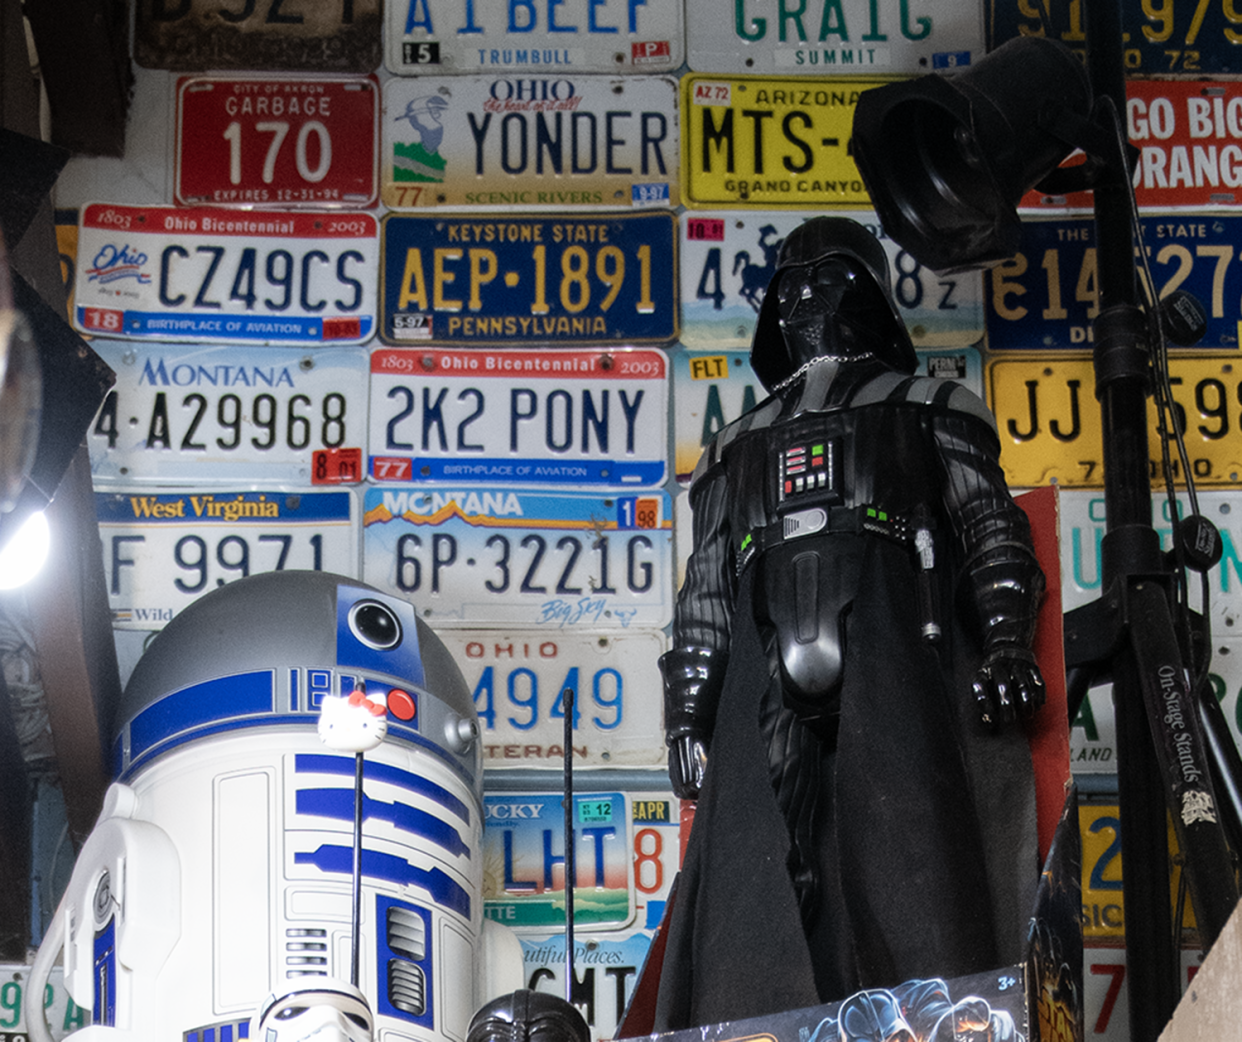 Star Wars items on display at Mike's Place in Kent include Darth Vader and R2-D2 figures on a ceiling shelf.